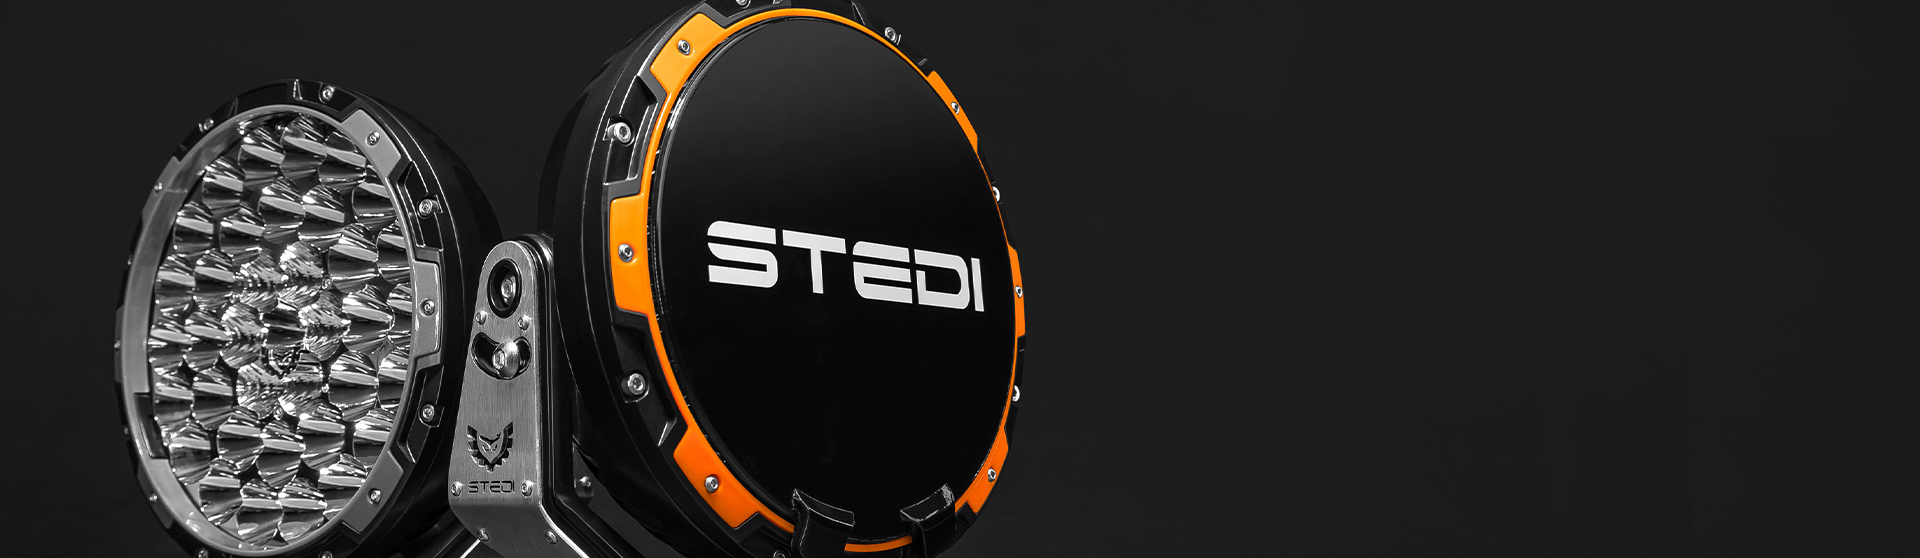 Stedi – TYPE-X Pro LED Driving Lights Available Now